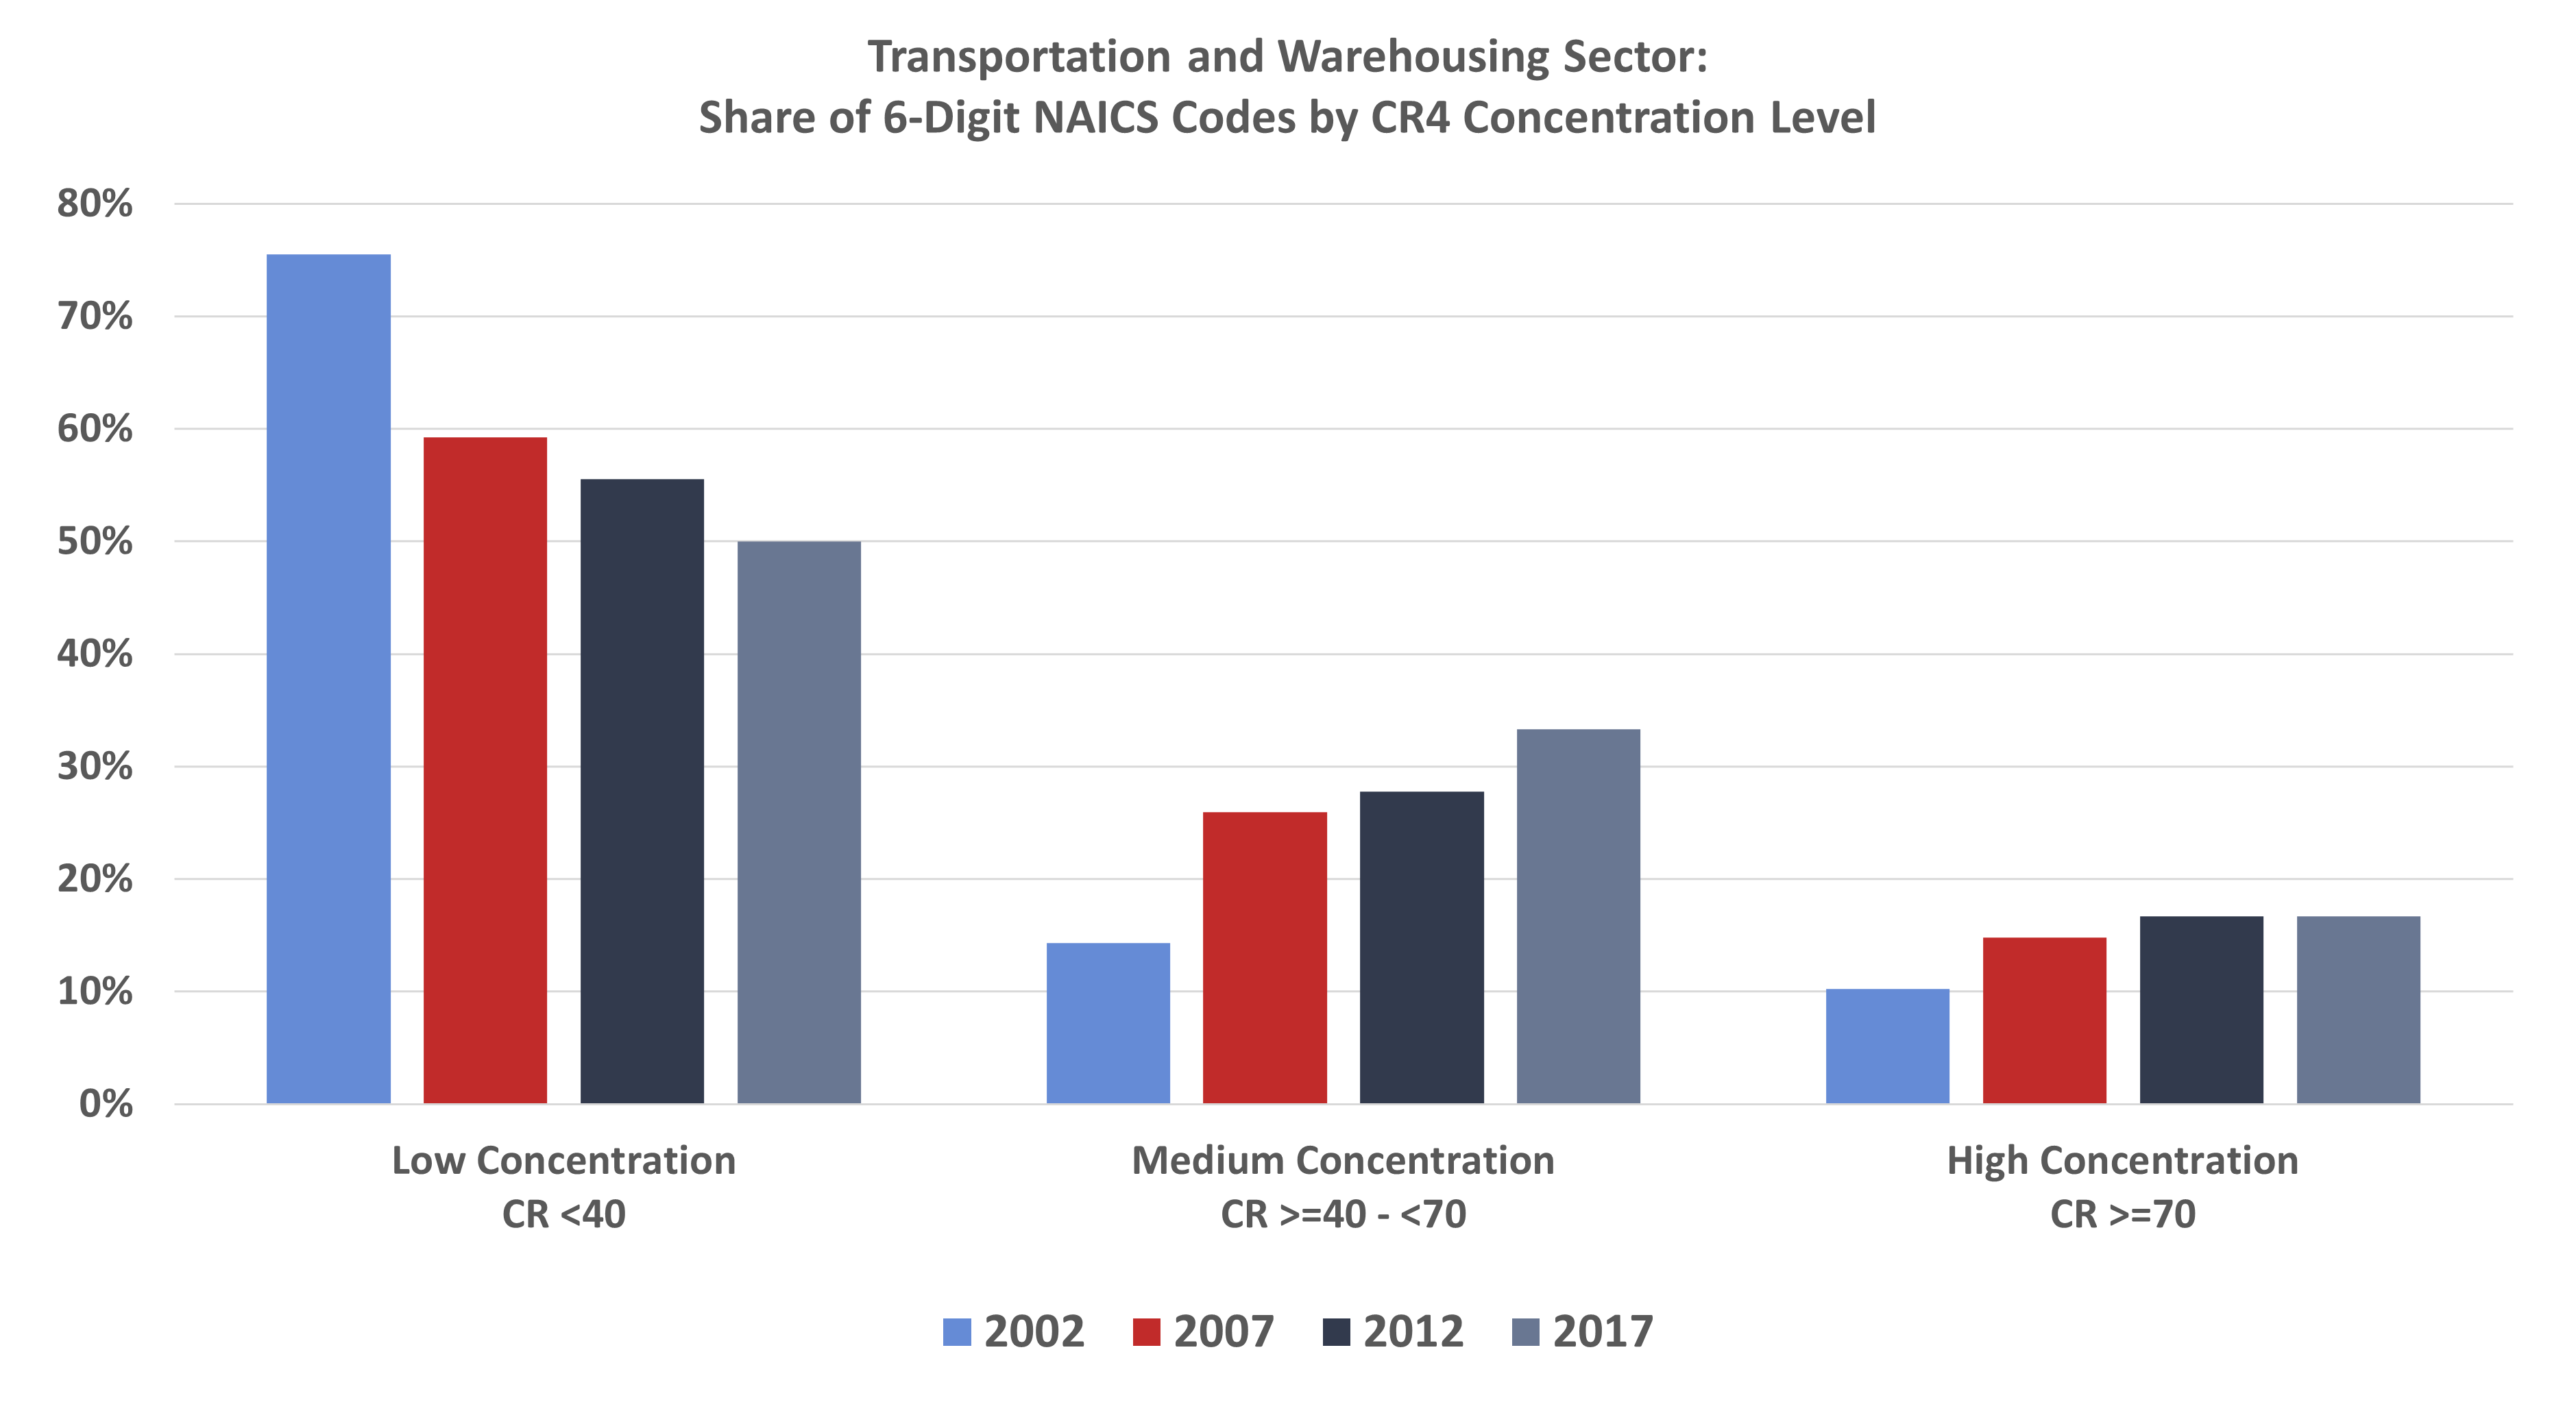 Transportation and Warehousing Sector: Share of 6-Digit NAICS Codes by CR4 Concentration Level